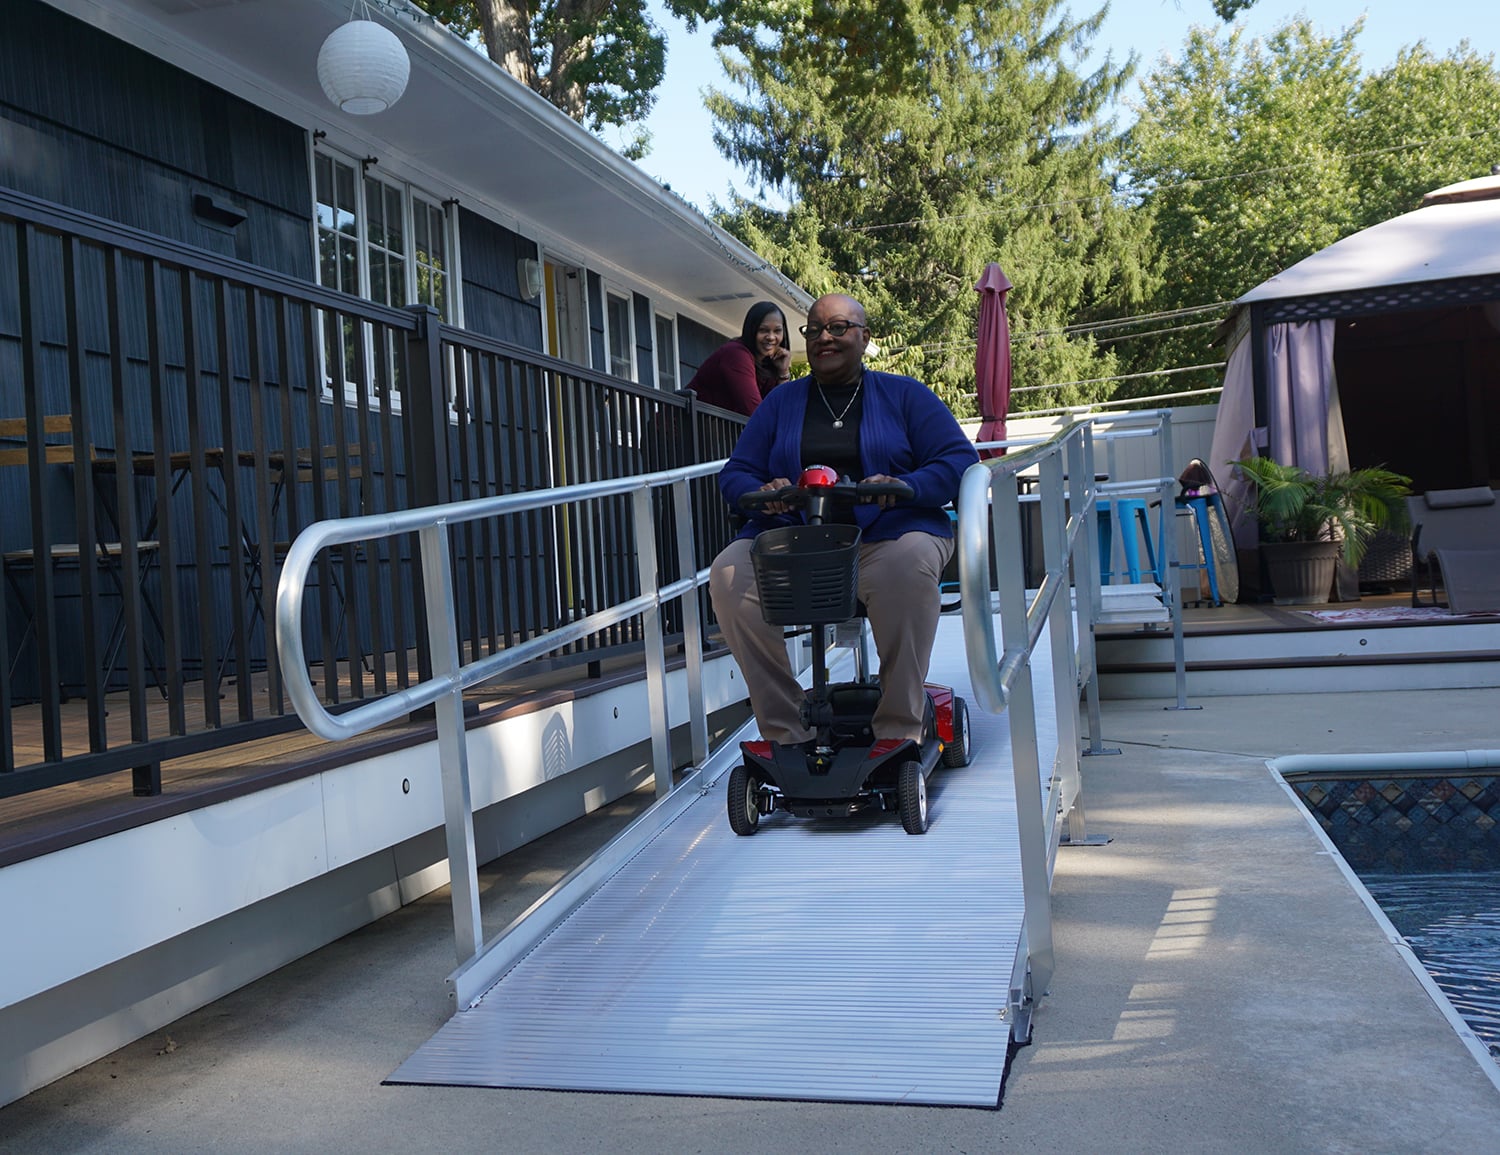 Woman going down an access ramp on a mobilized scooter